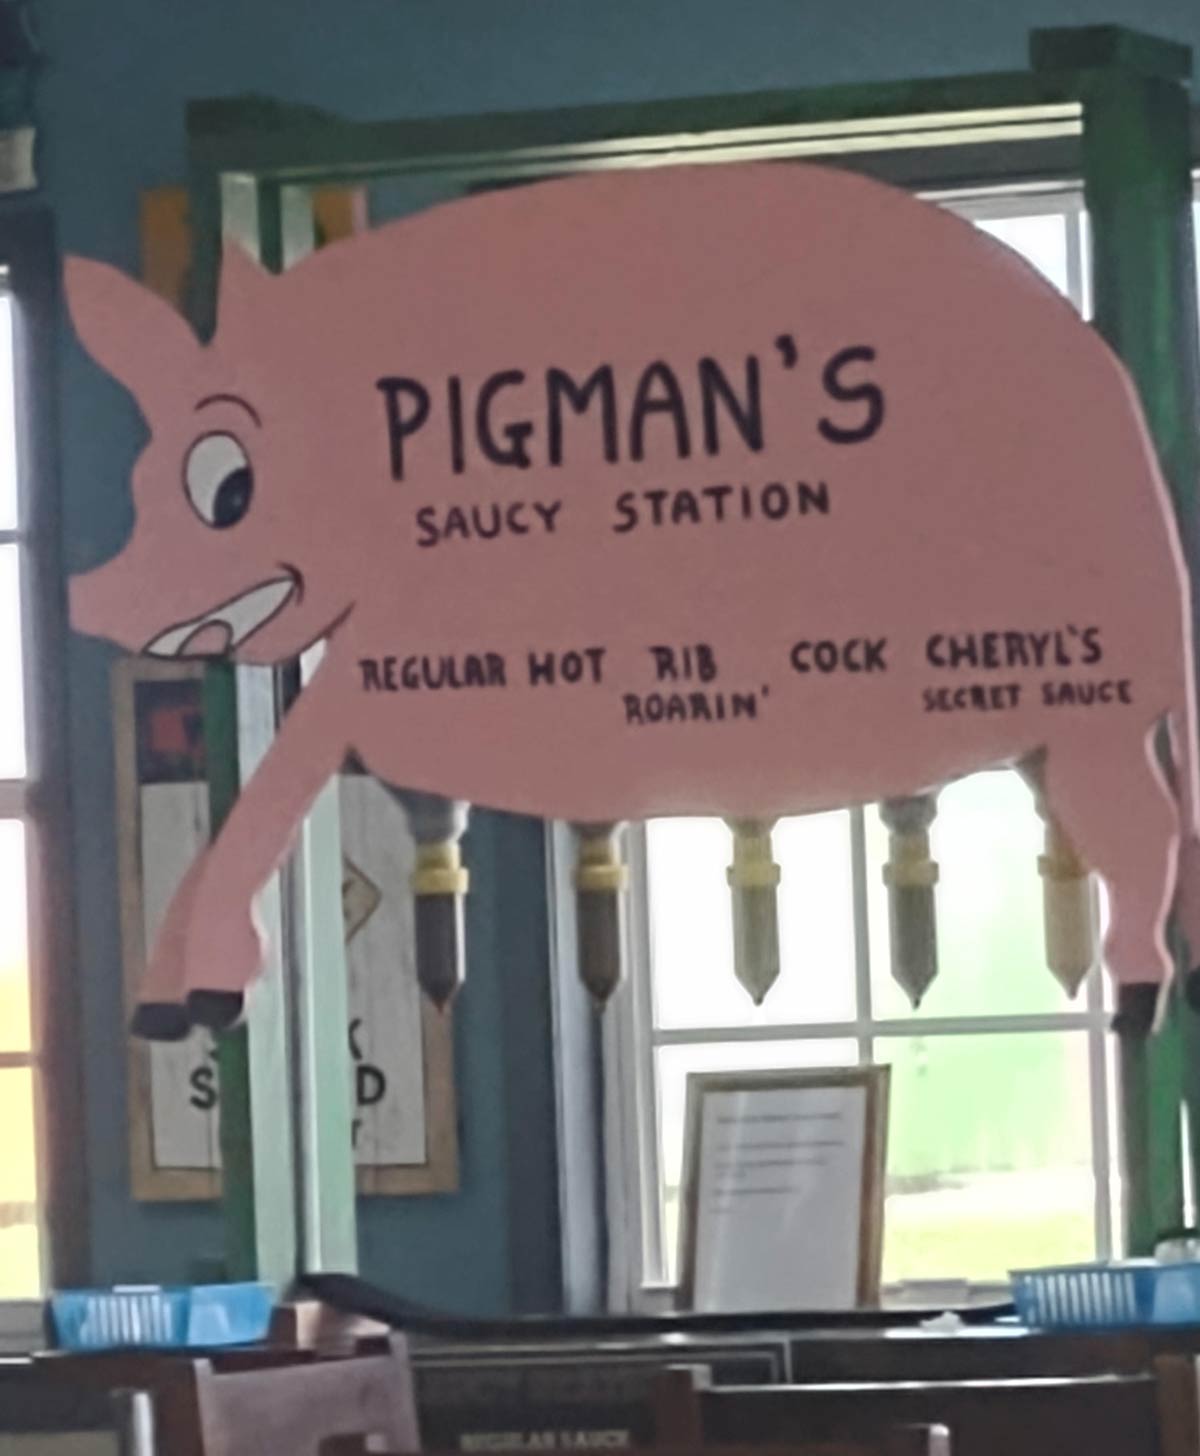 You have to milk the pig to get your bbq sauce at this restaurant